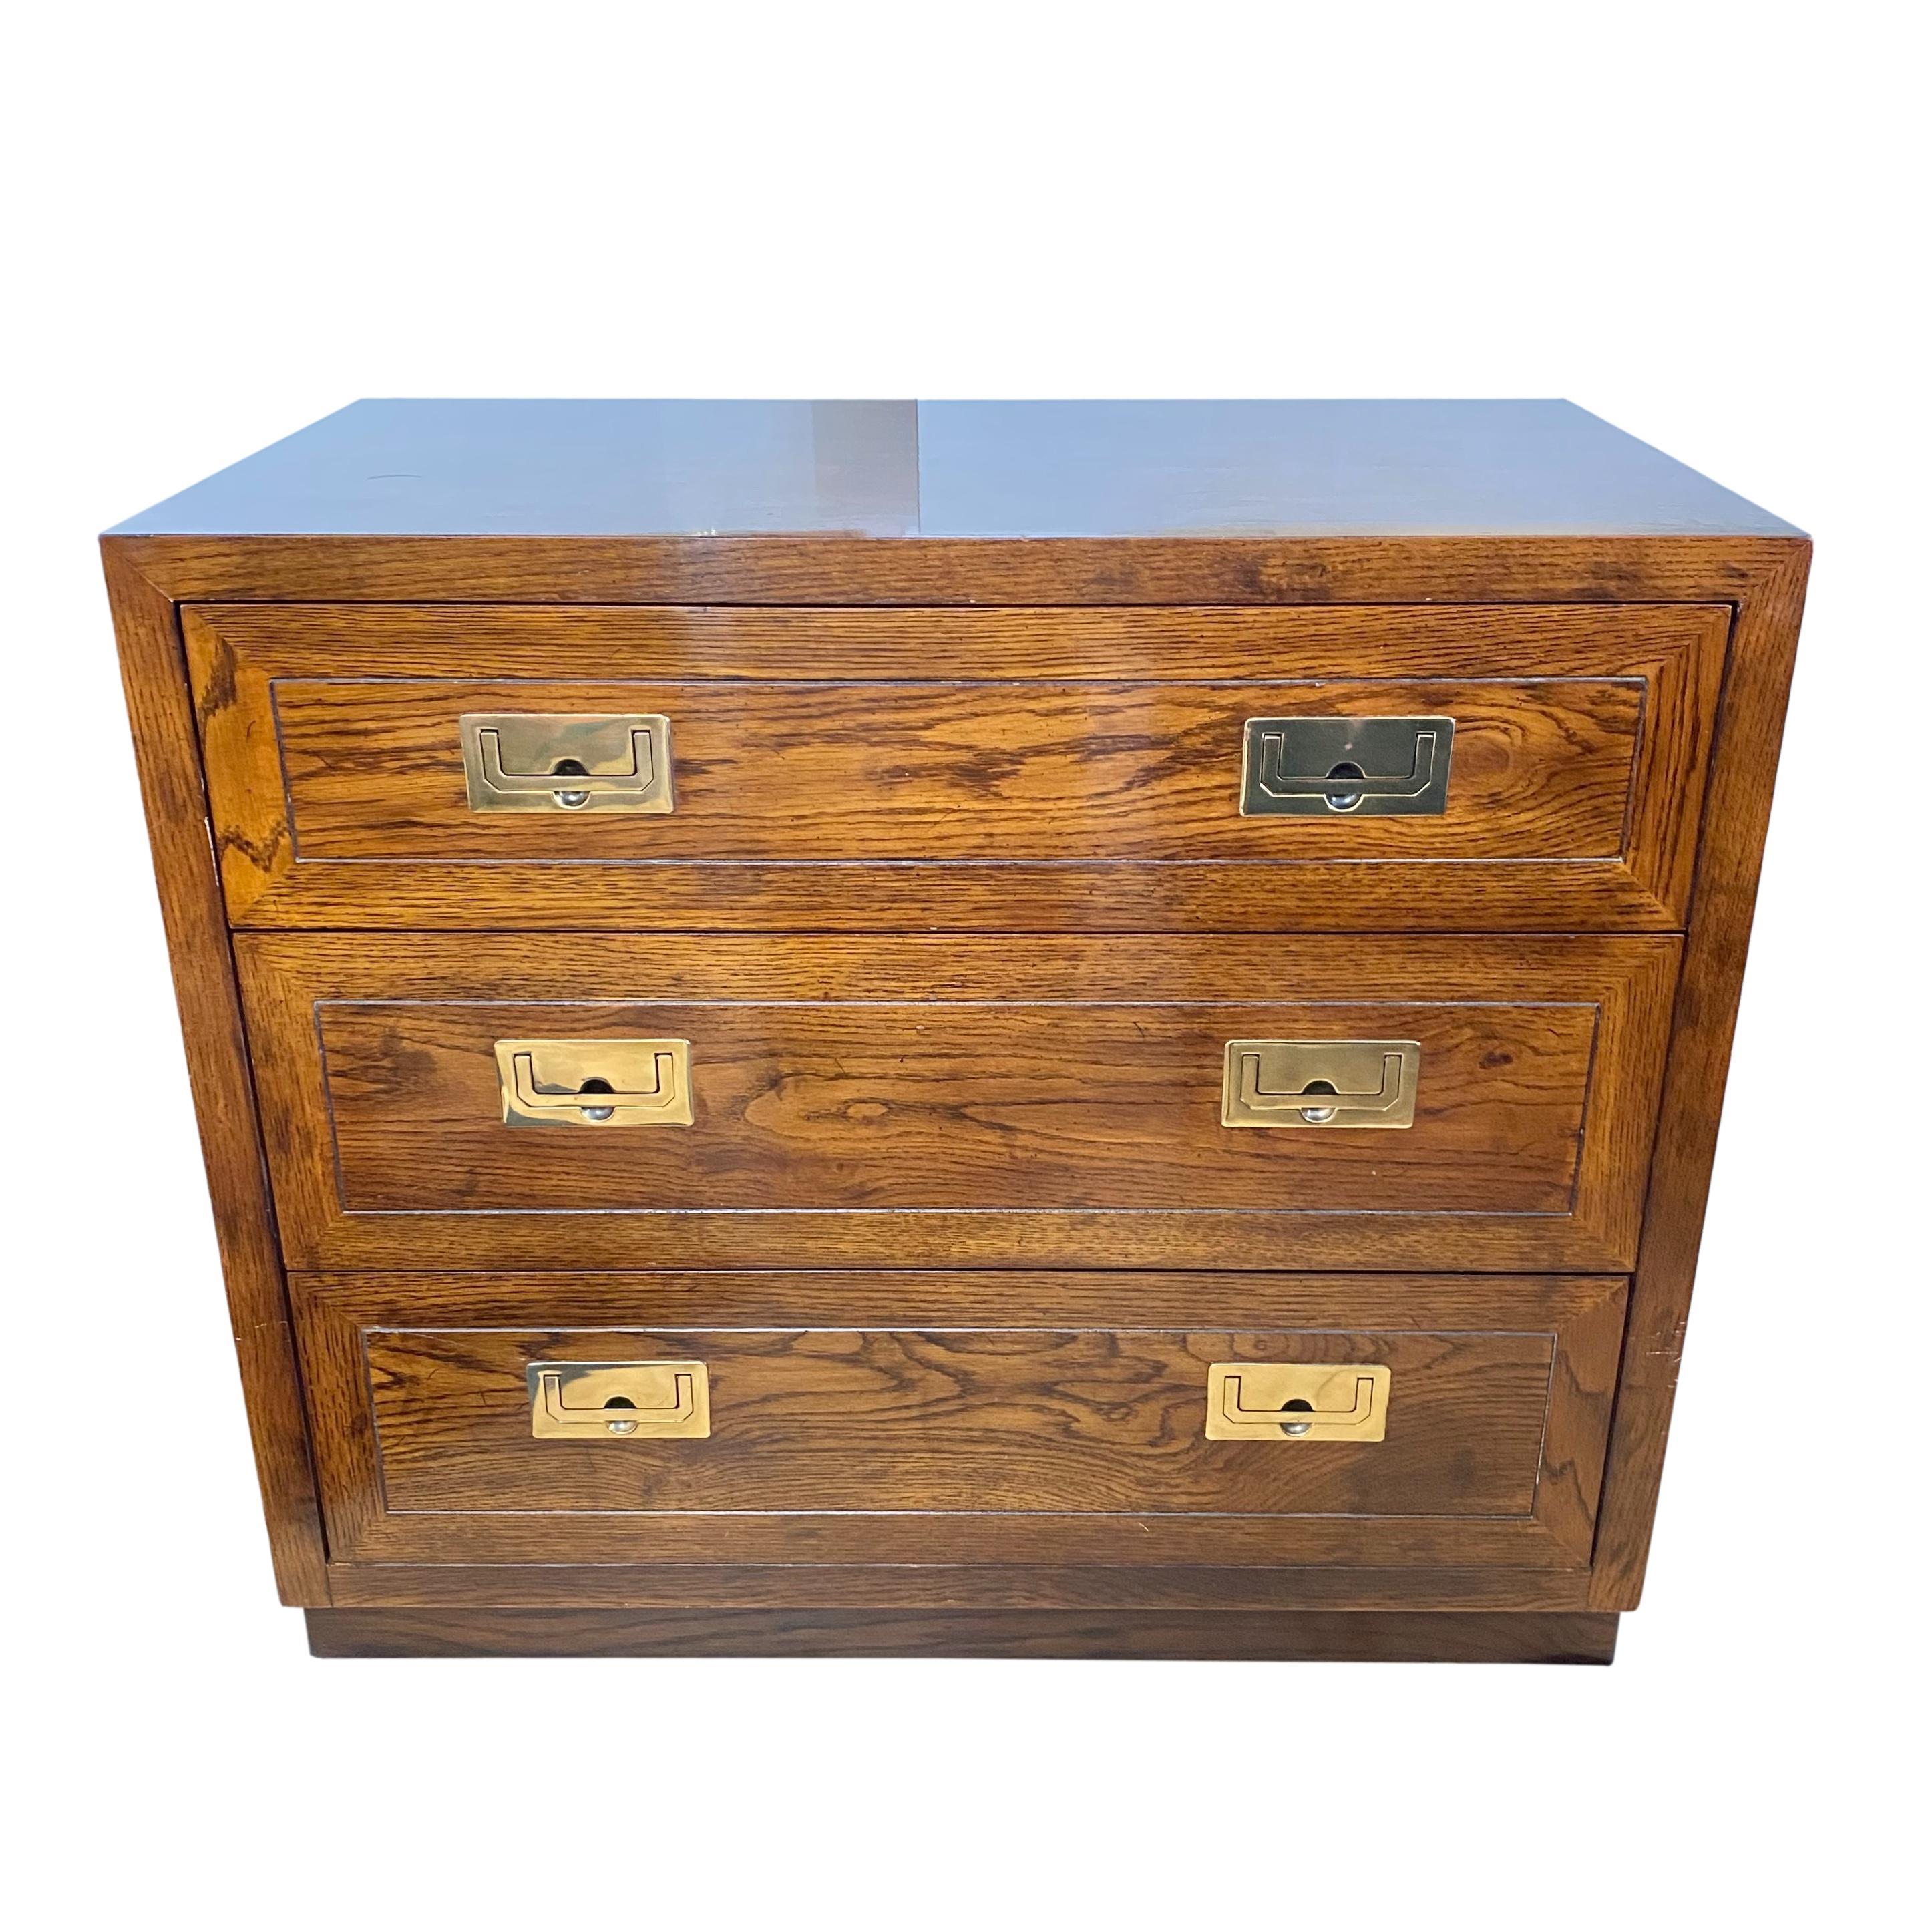 A vintage three drawer campaign style bachelor's chest or nightstand by Henredon. Oak finish with brass hardware.

Dimensions: 32